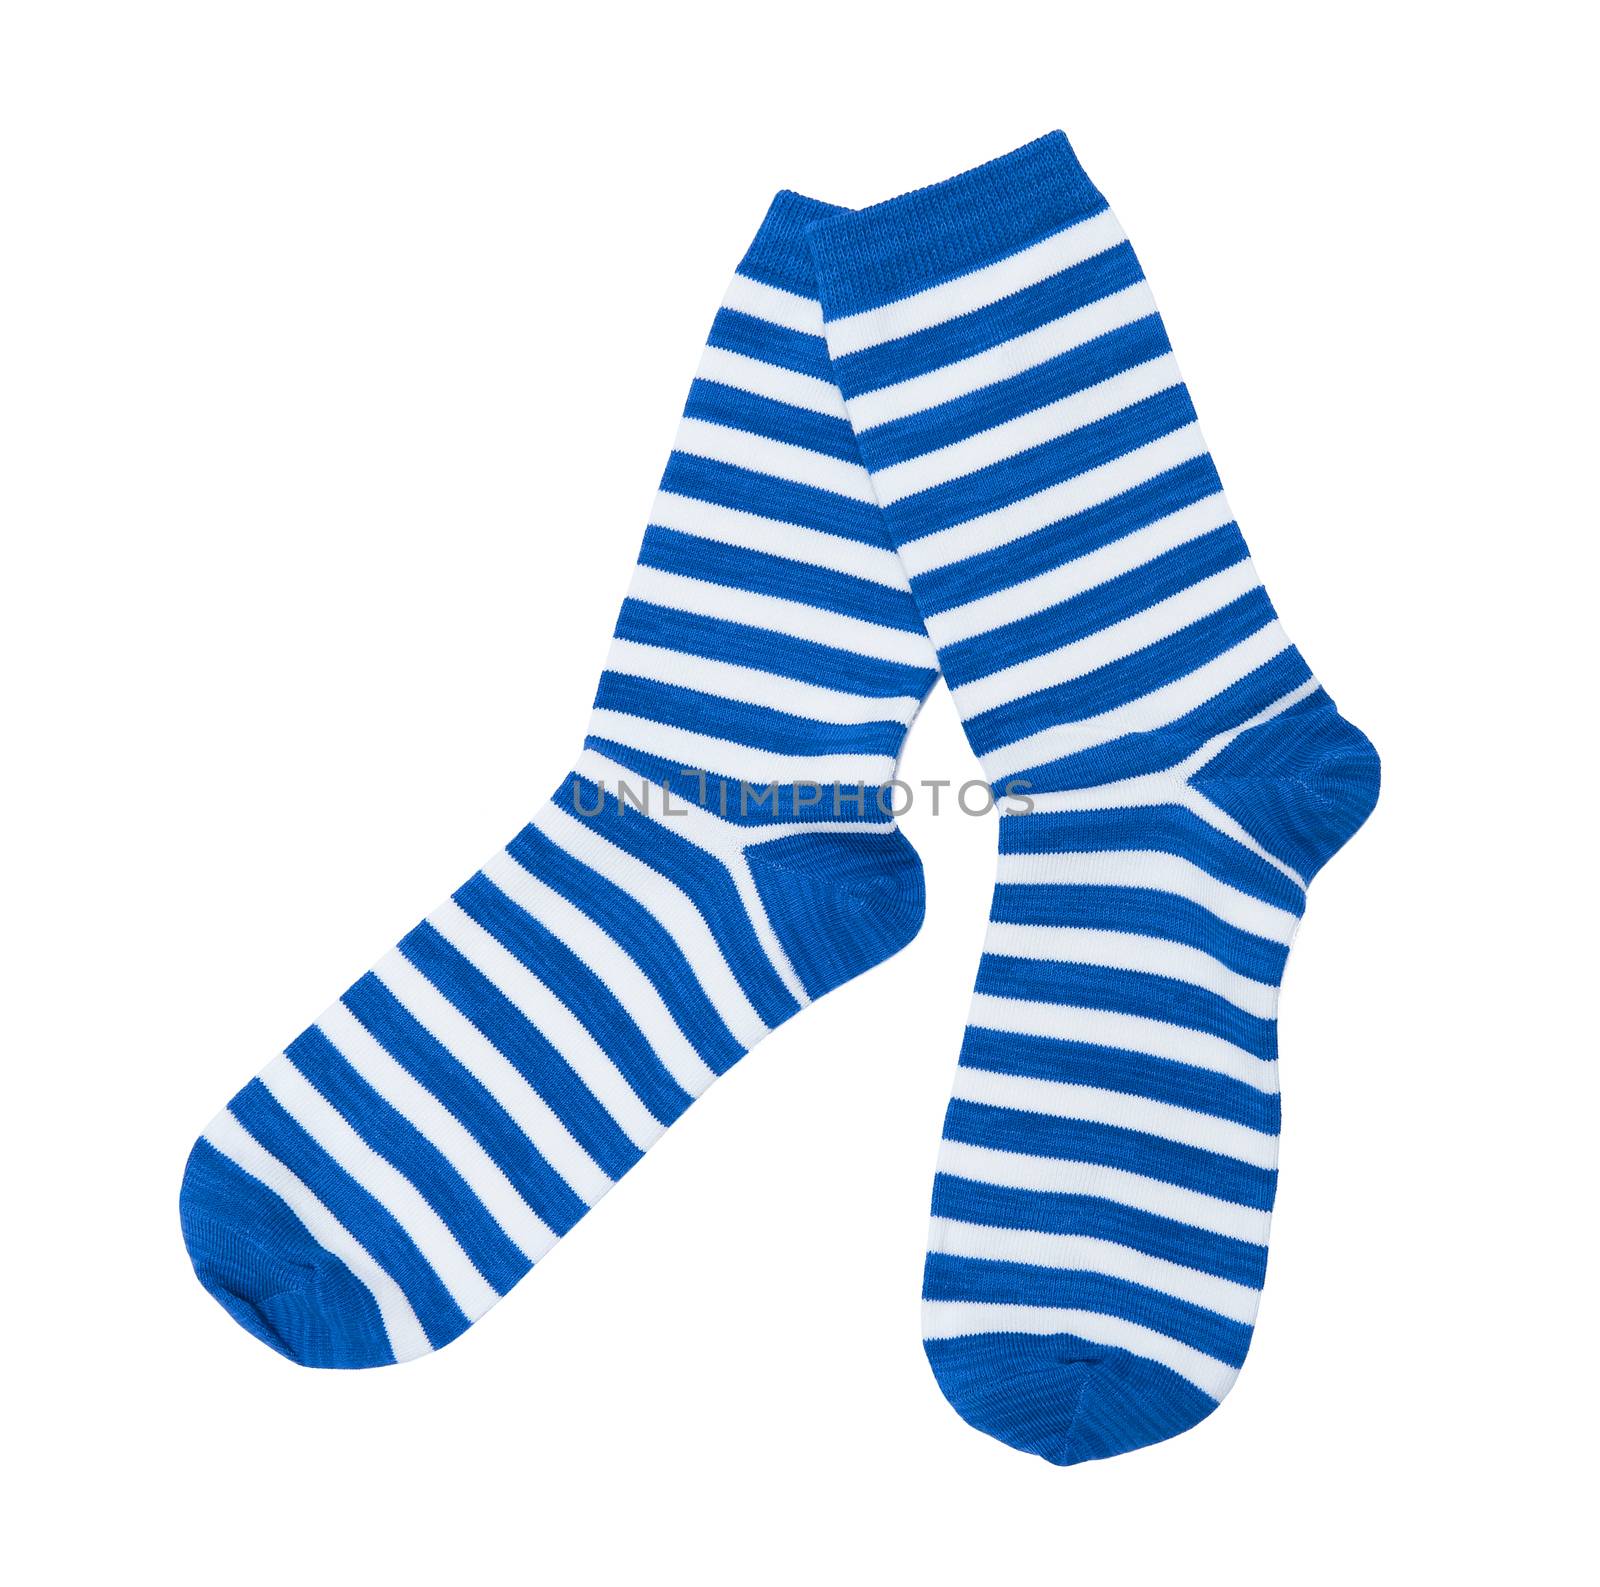 Striped socks isolated on the white background by Yaurinko